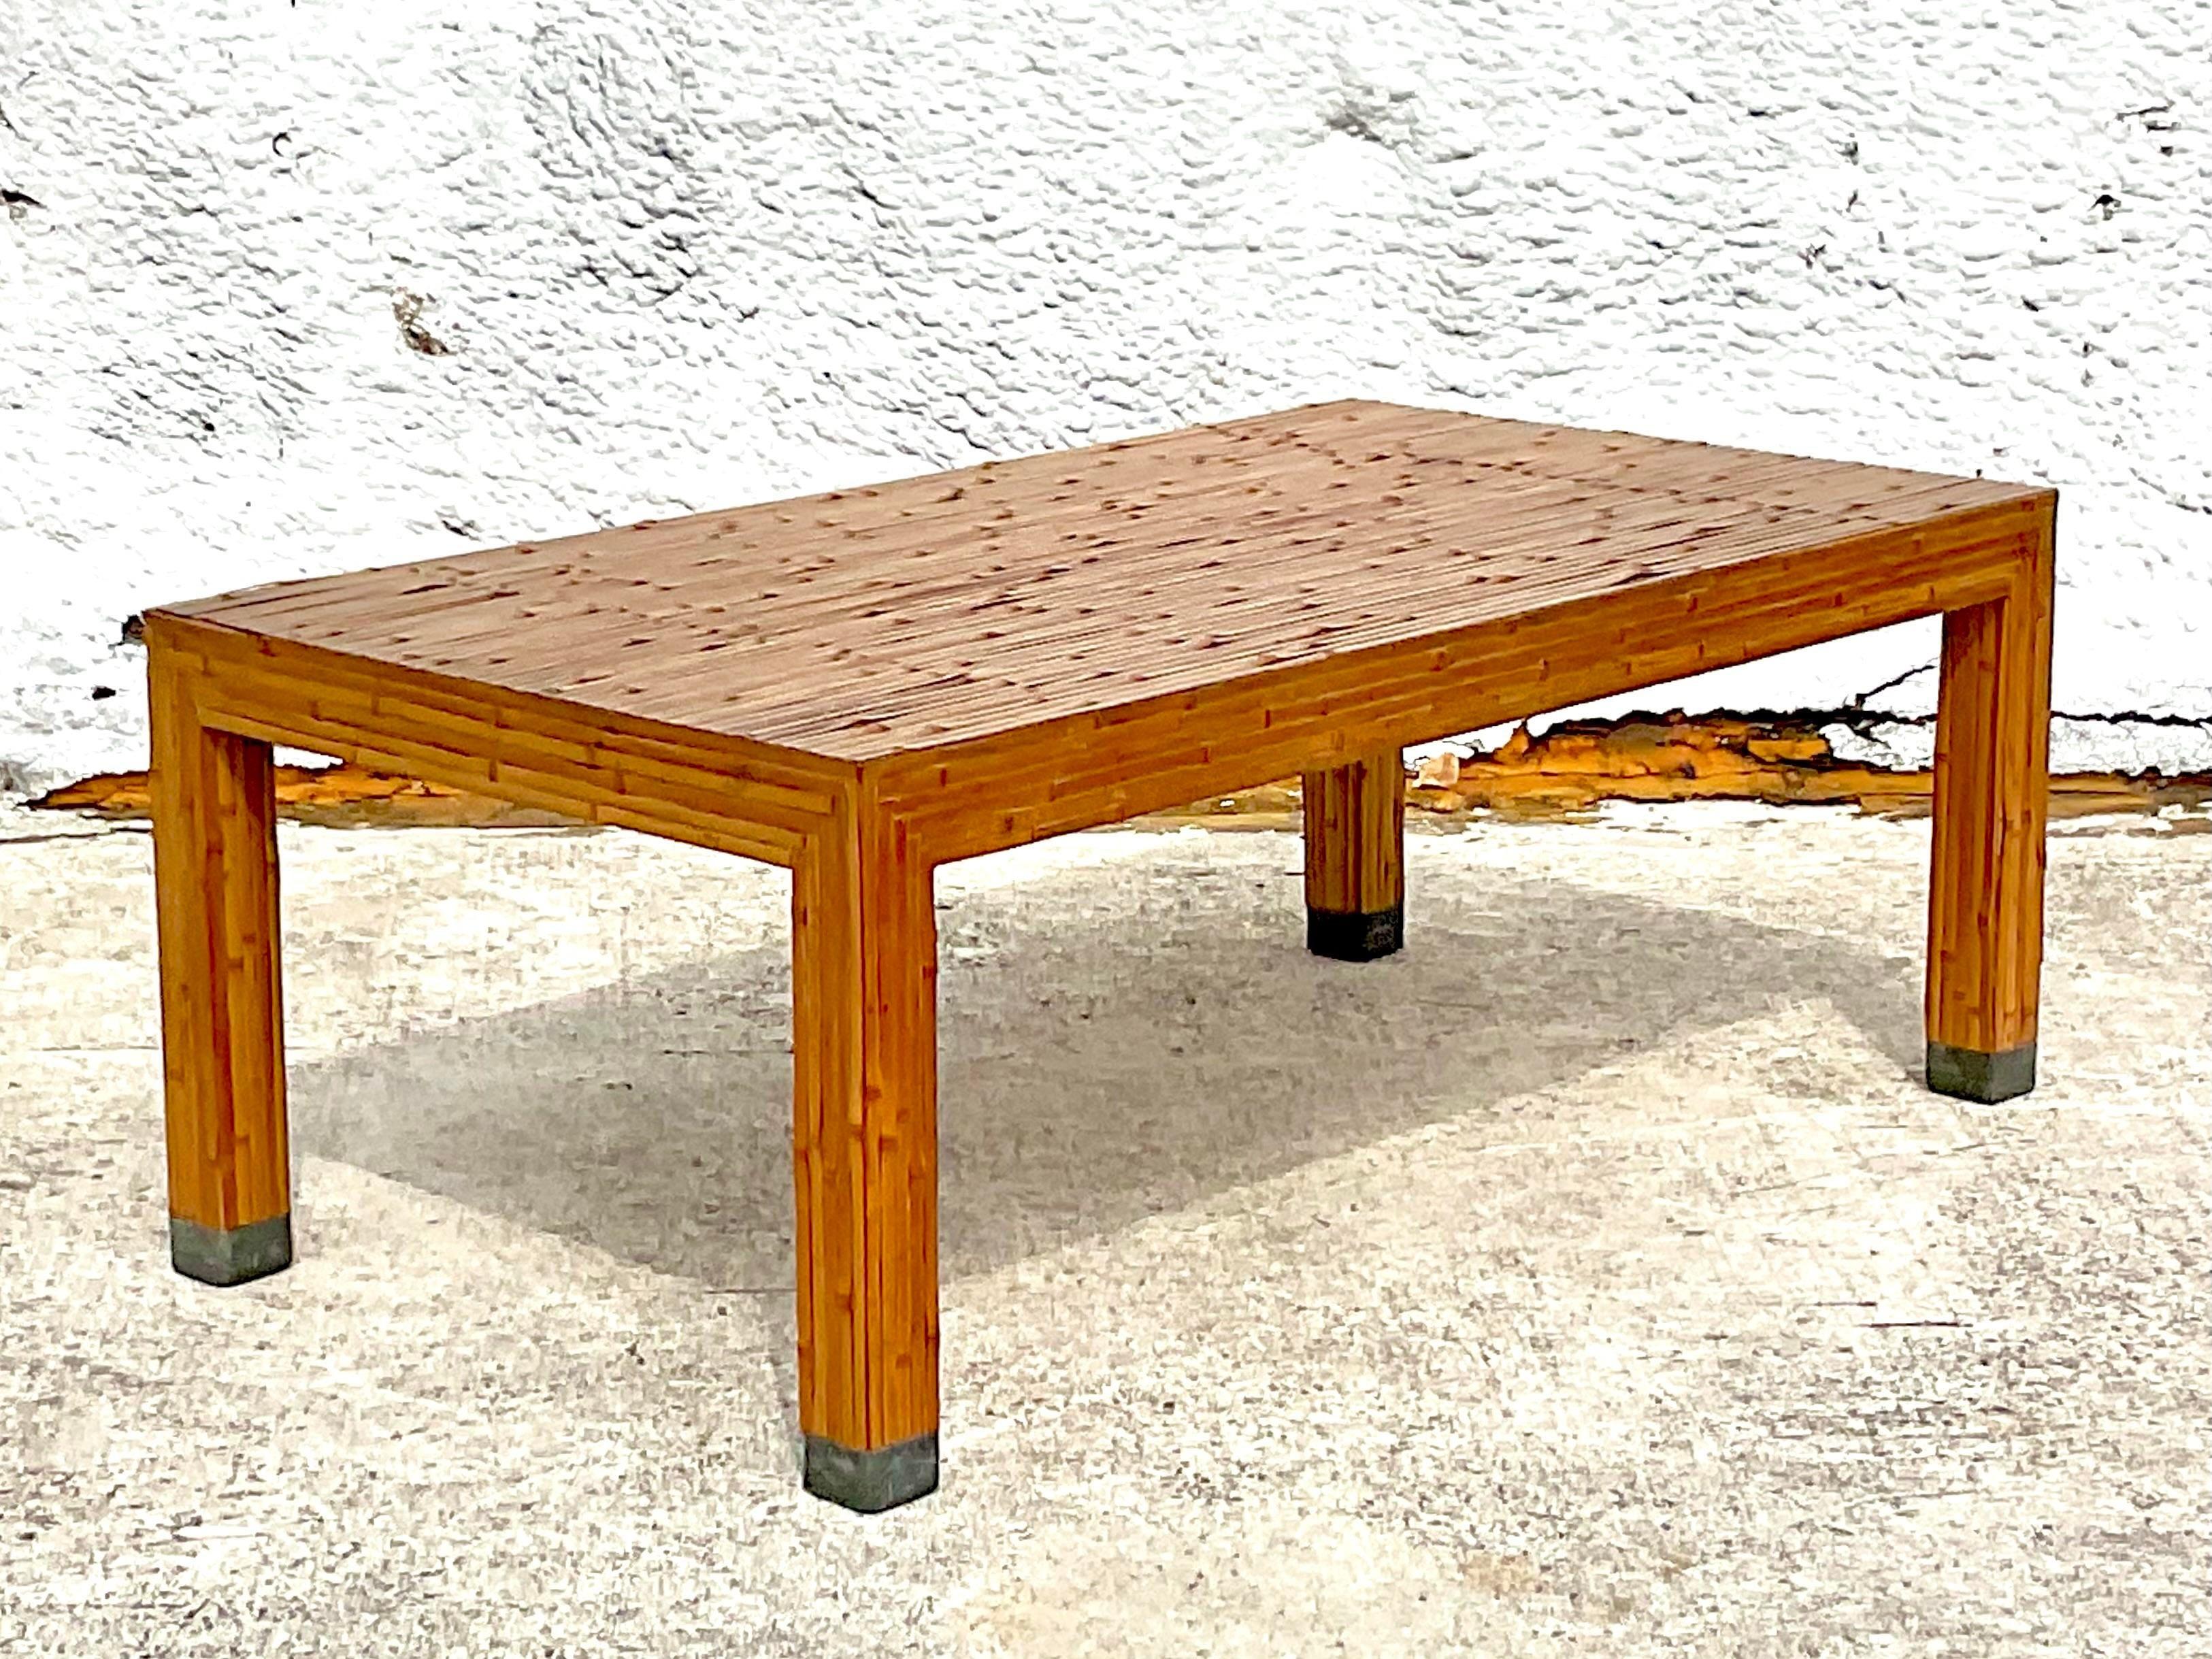 A fabulous vintage Coastal coffee table. A chic split bamboo design in a clean Parsons shape. Acquired from a Palm Beach estate.